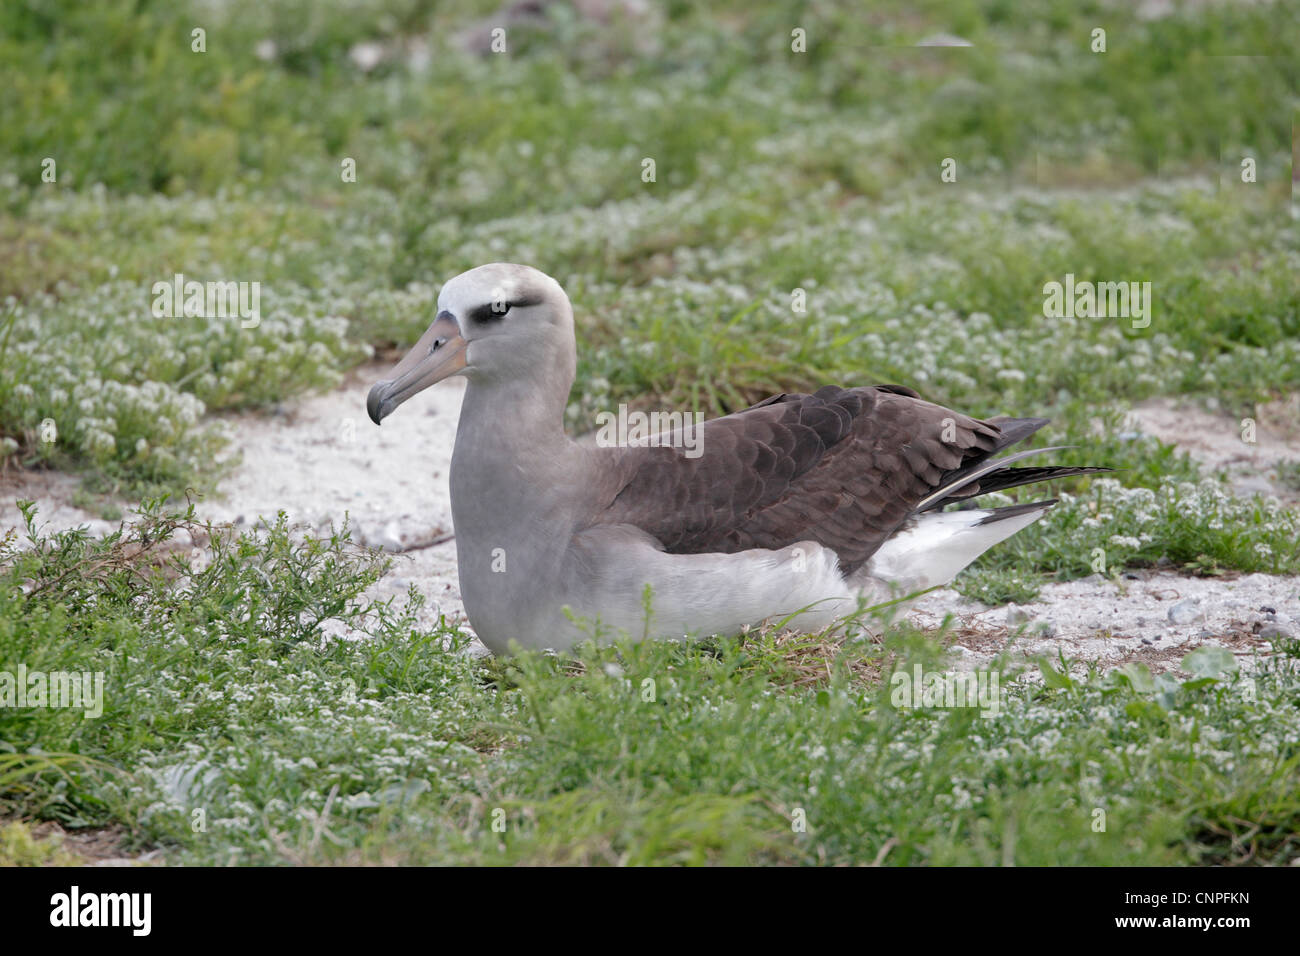 Cross breed albatross between Laysan and Black-footed Stock Photo